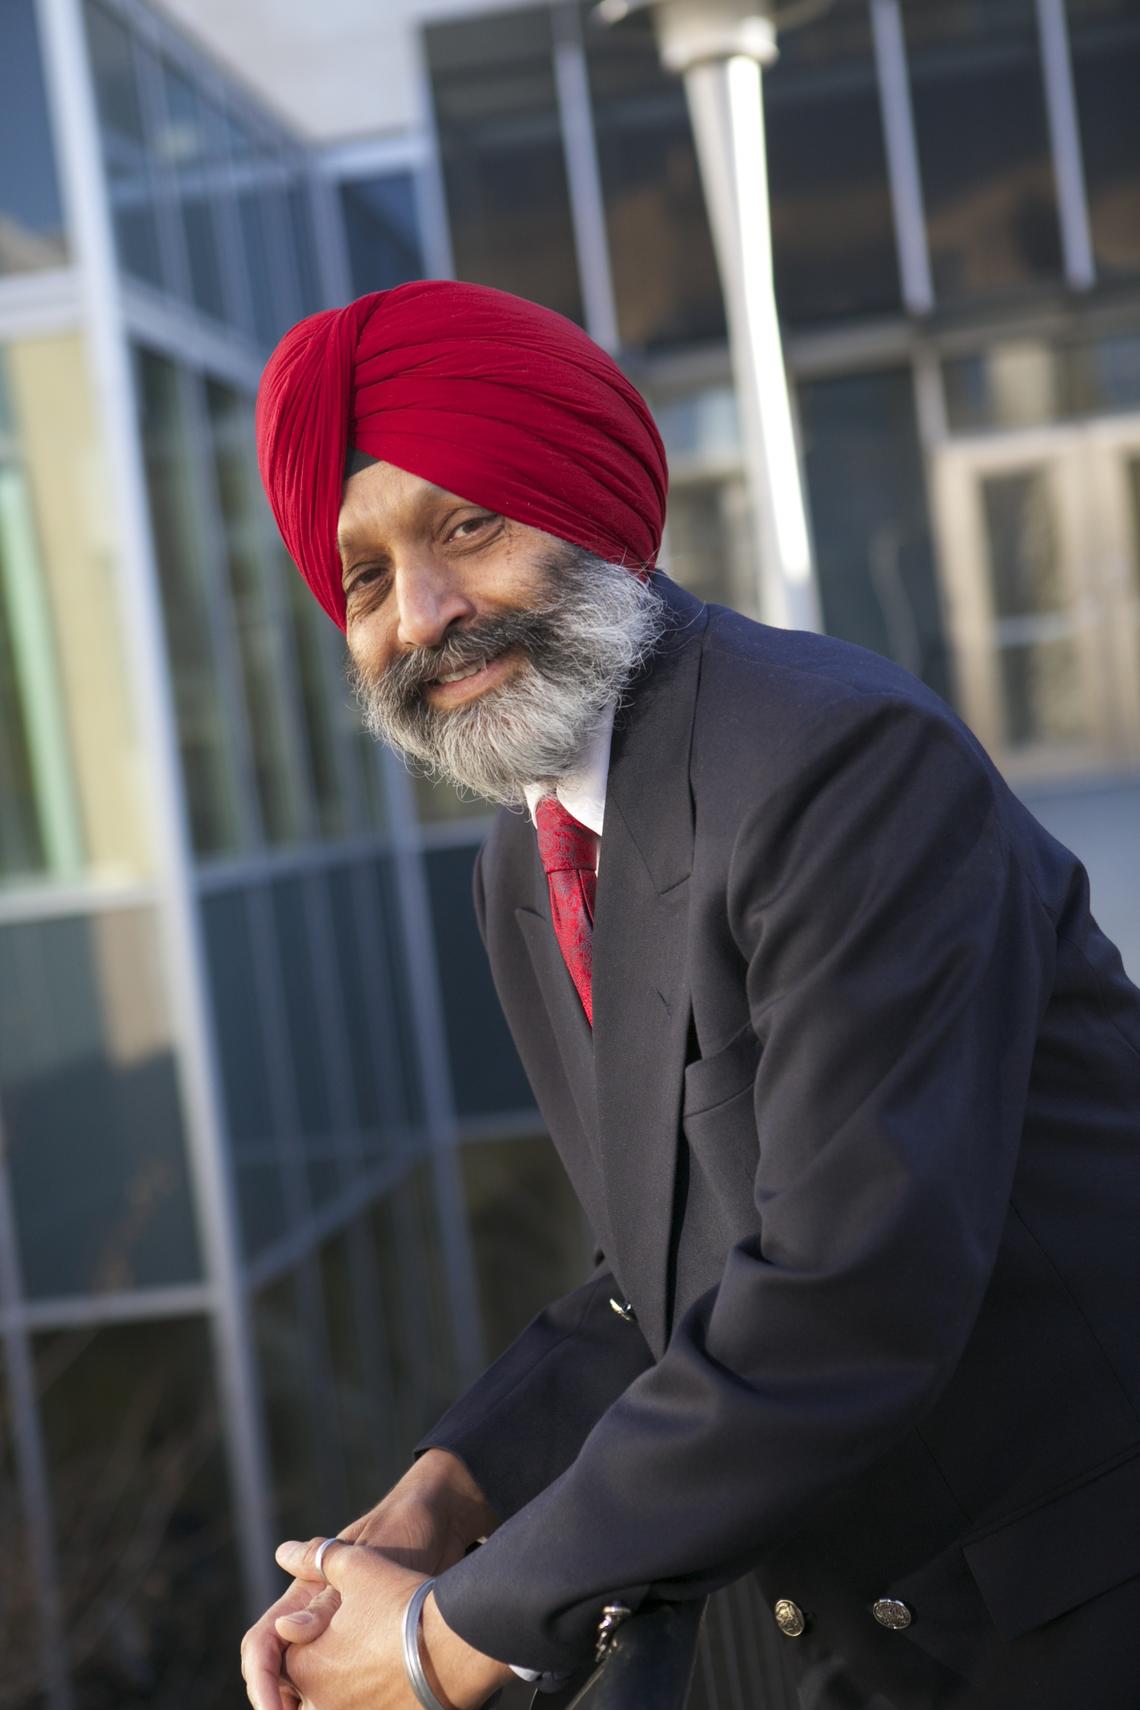 Baljit Singh's appointment as dean of the Faculty of Veterinary Medicine, University of Calgary, takes effect on Sept. 1, 2016.